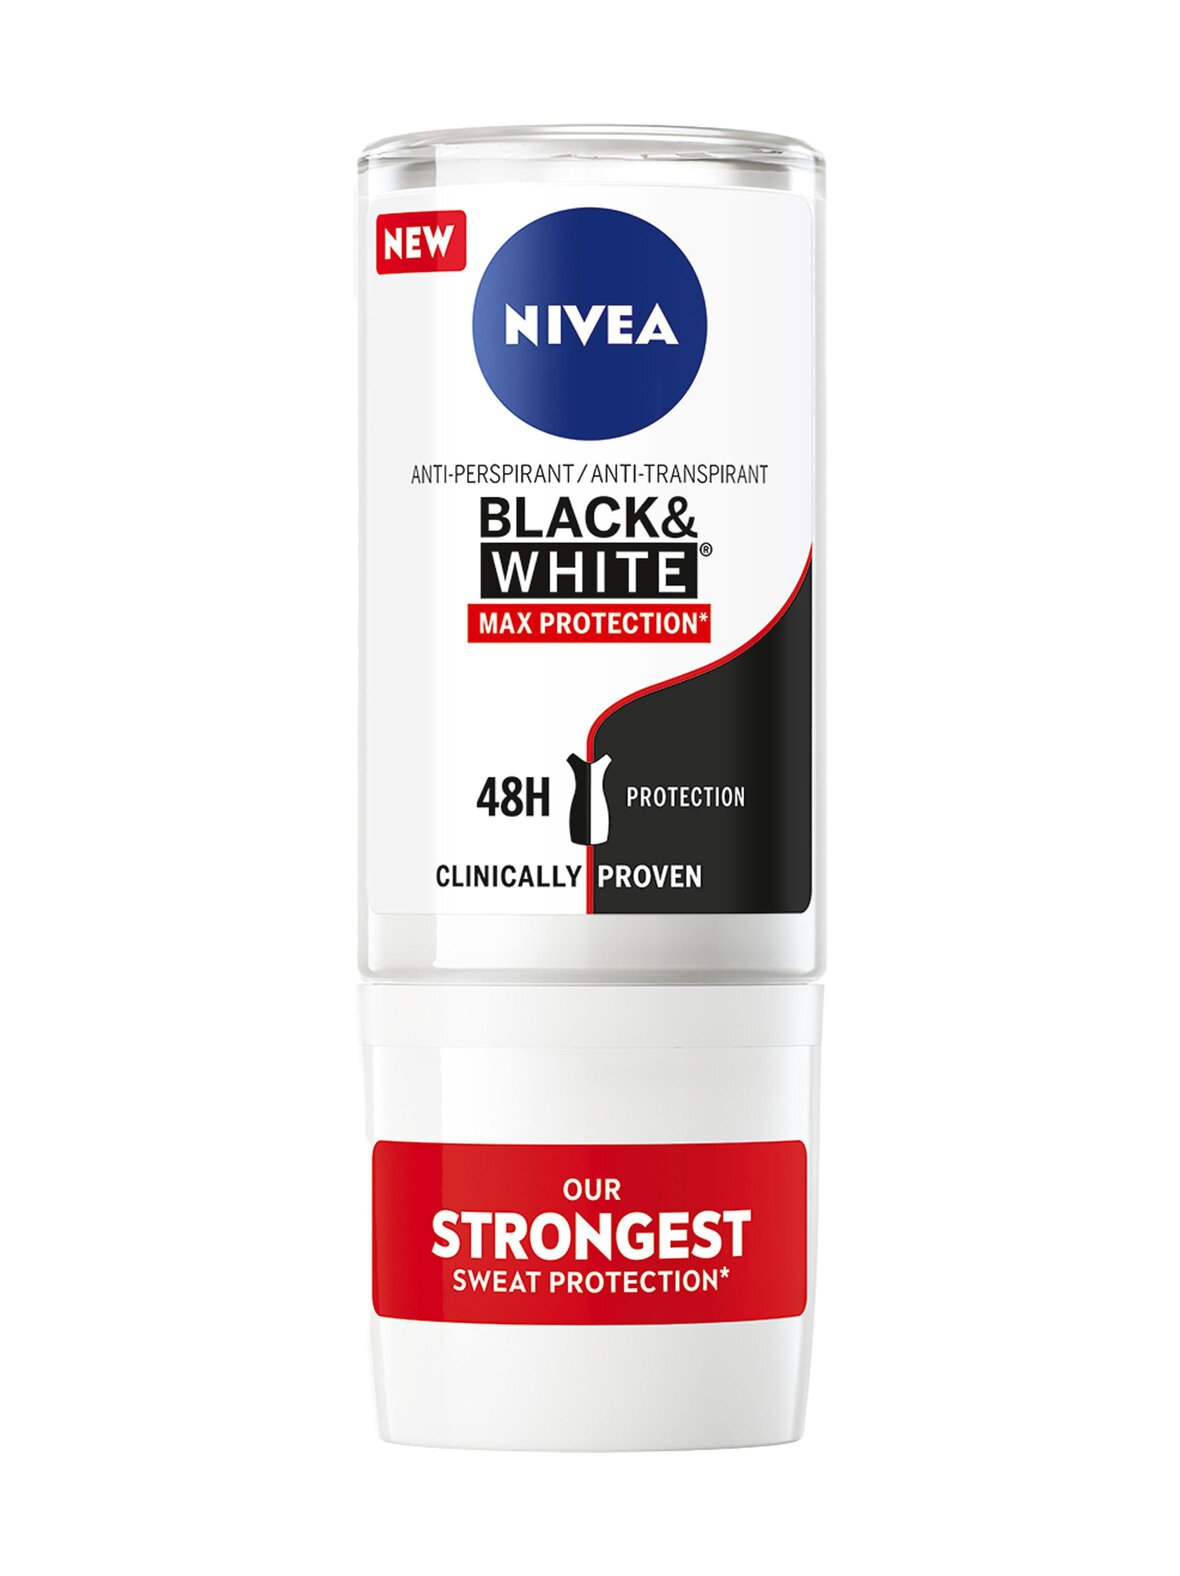 NIVEA Black & white max protection roll-on deo 48h -anti-perspirant